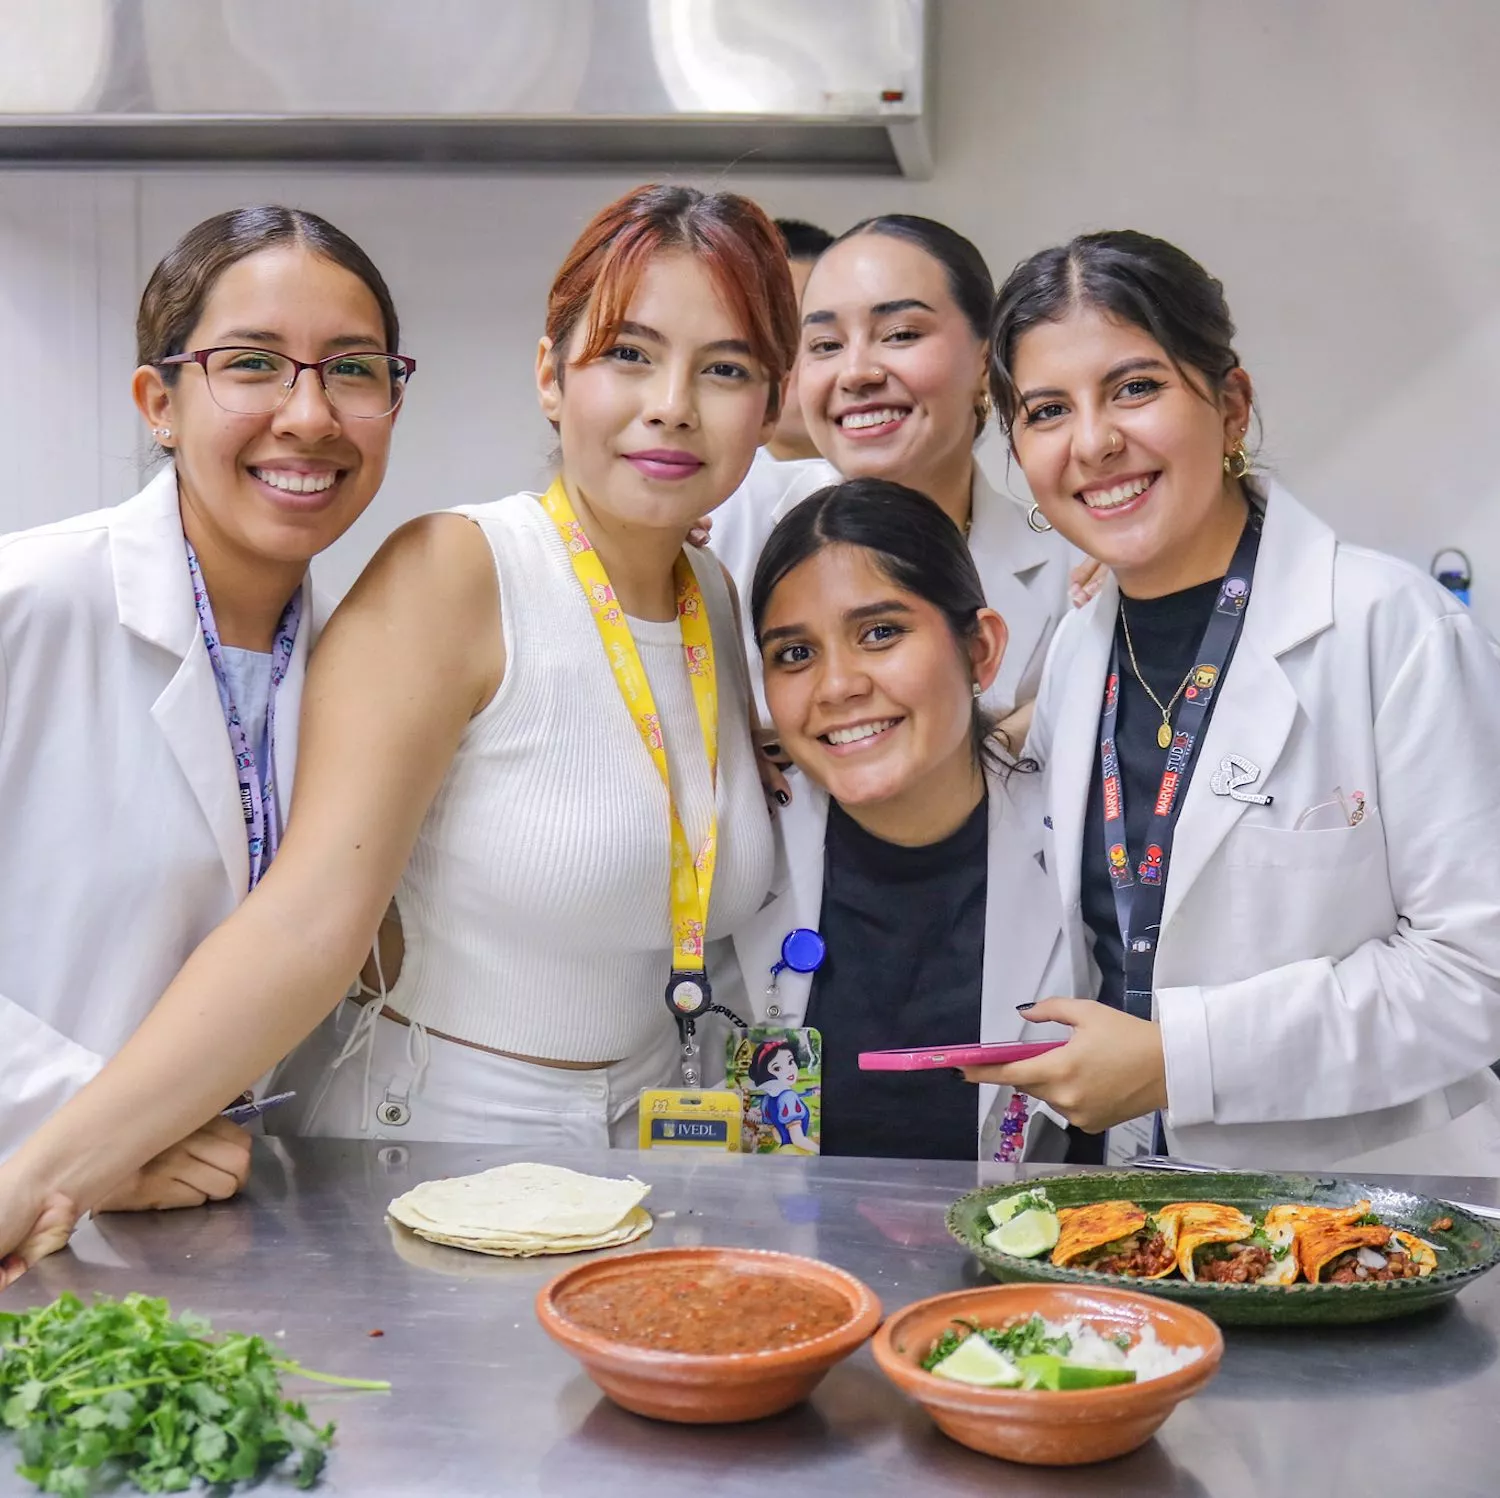 Dietetics students during a plant-based workshop in Mexico